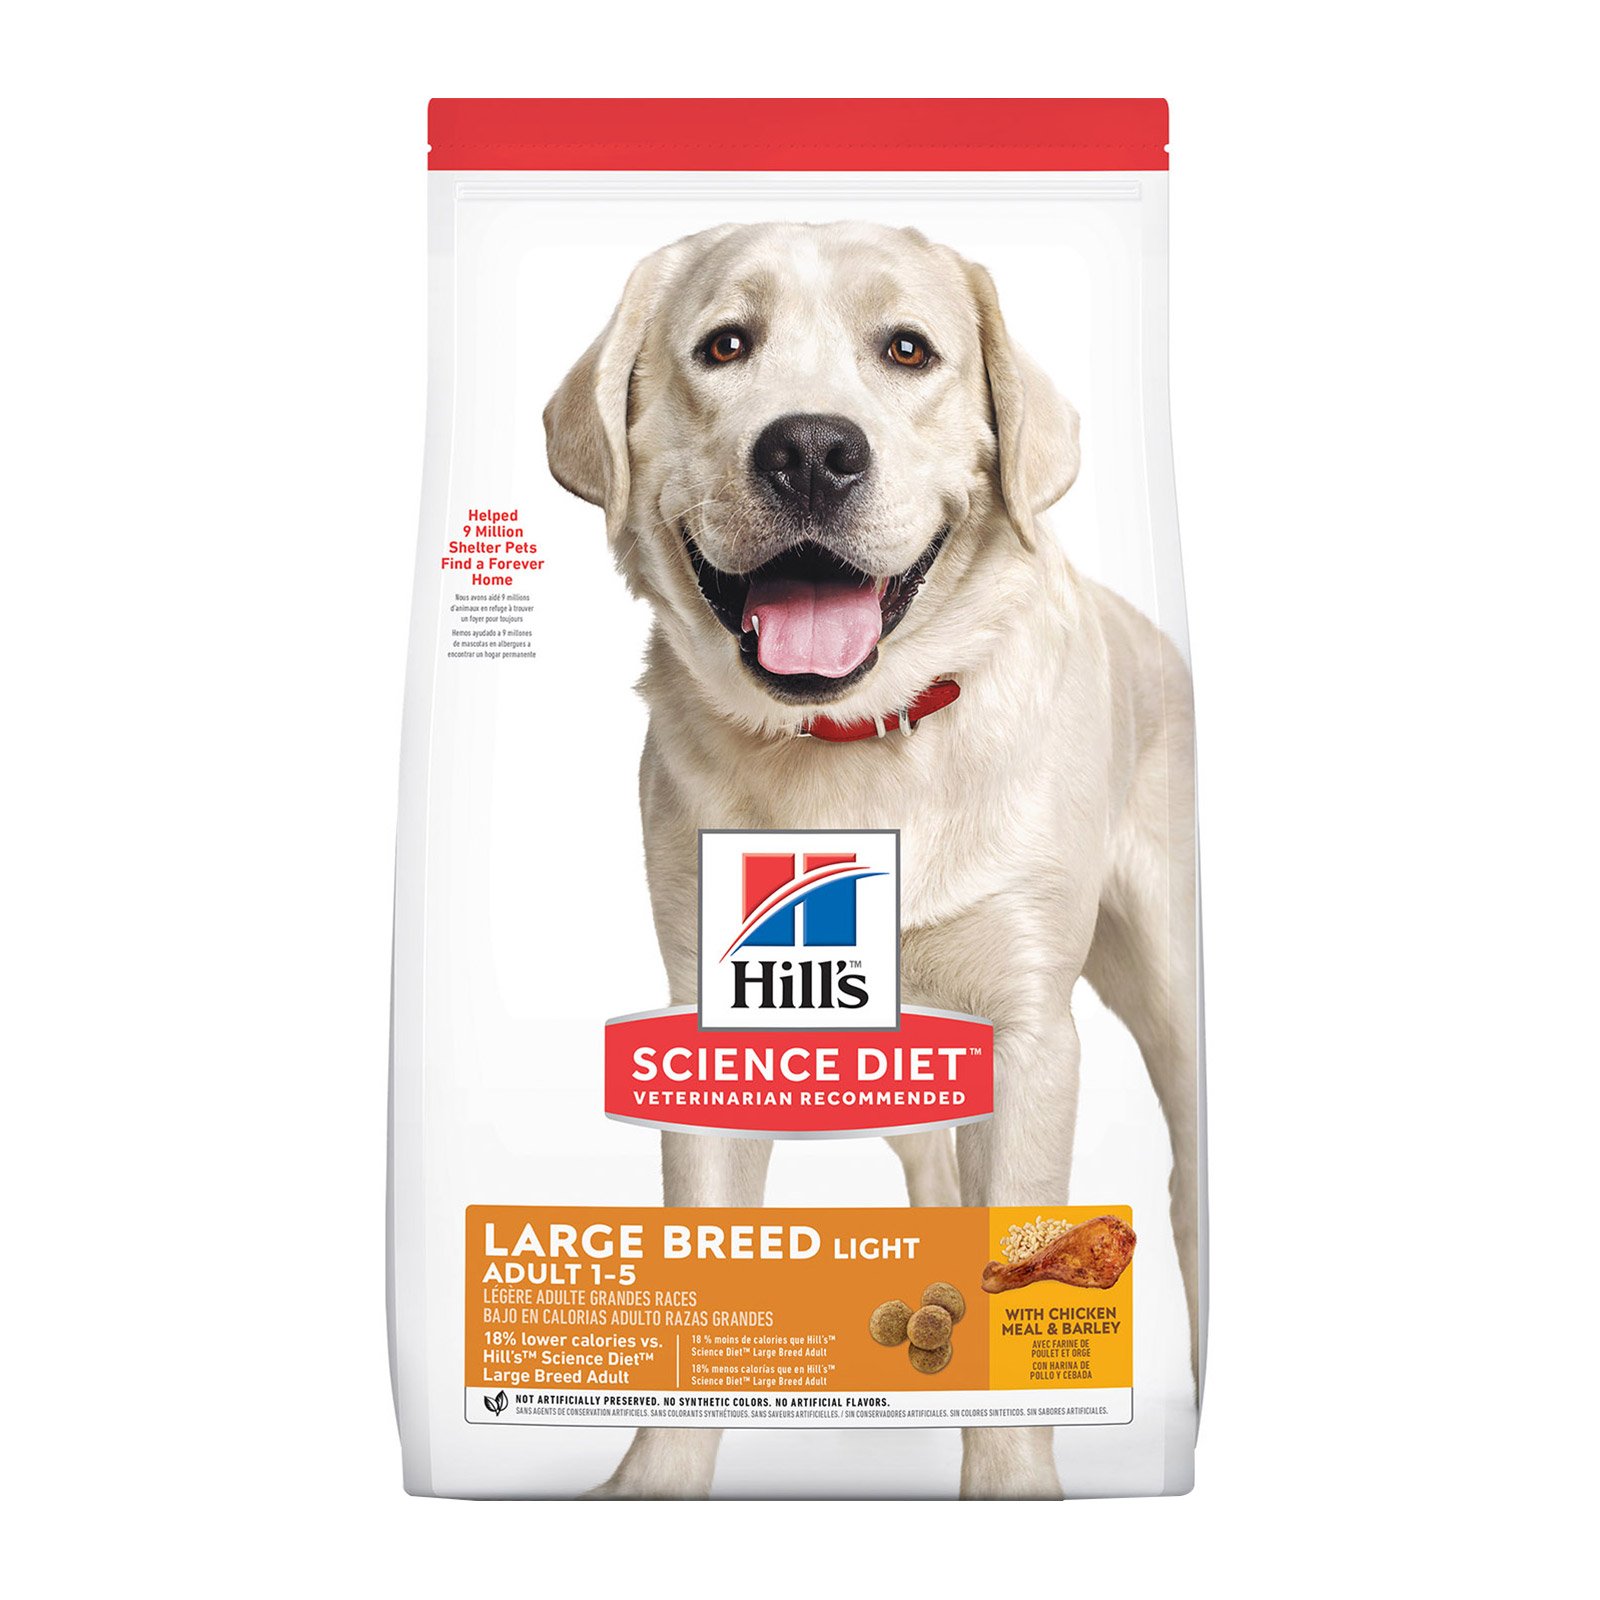 Hill's Science Diet Adult Light Large Breed with Chicken Meal & Barley Dry Dog Food